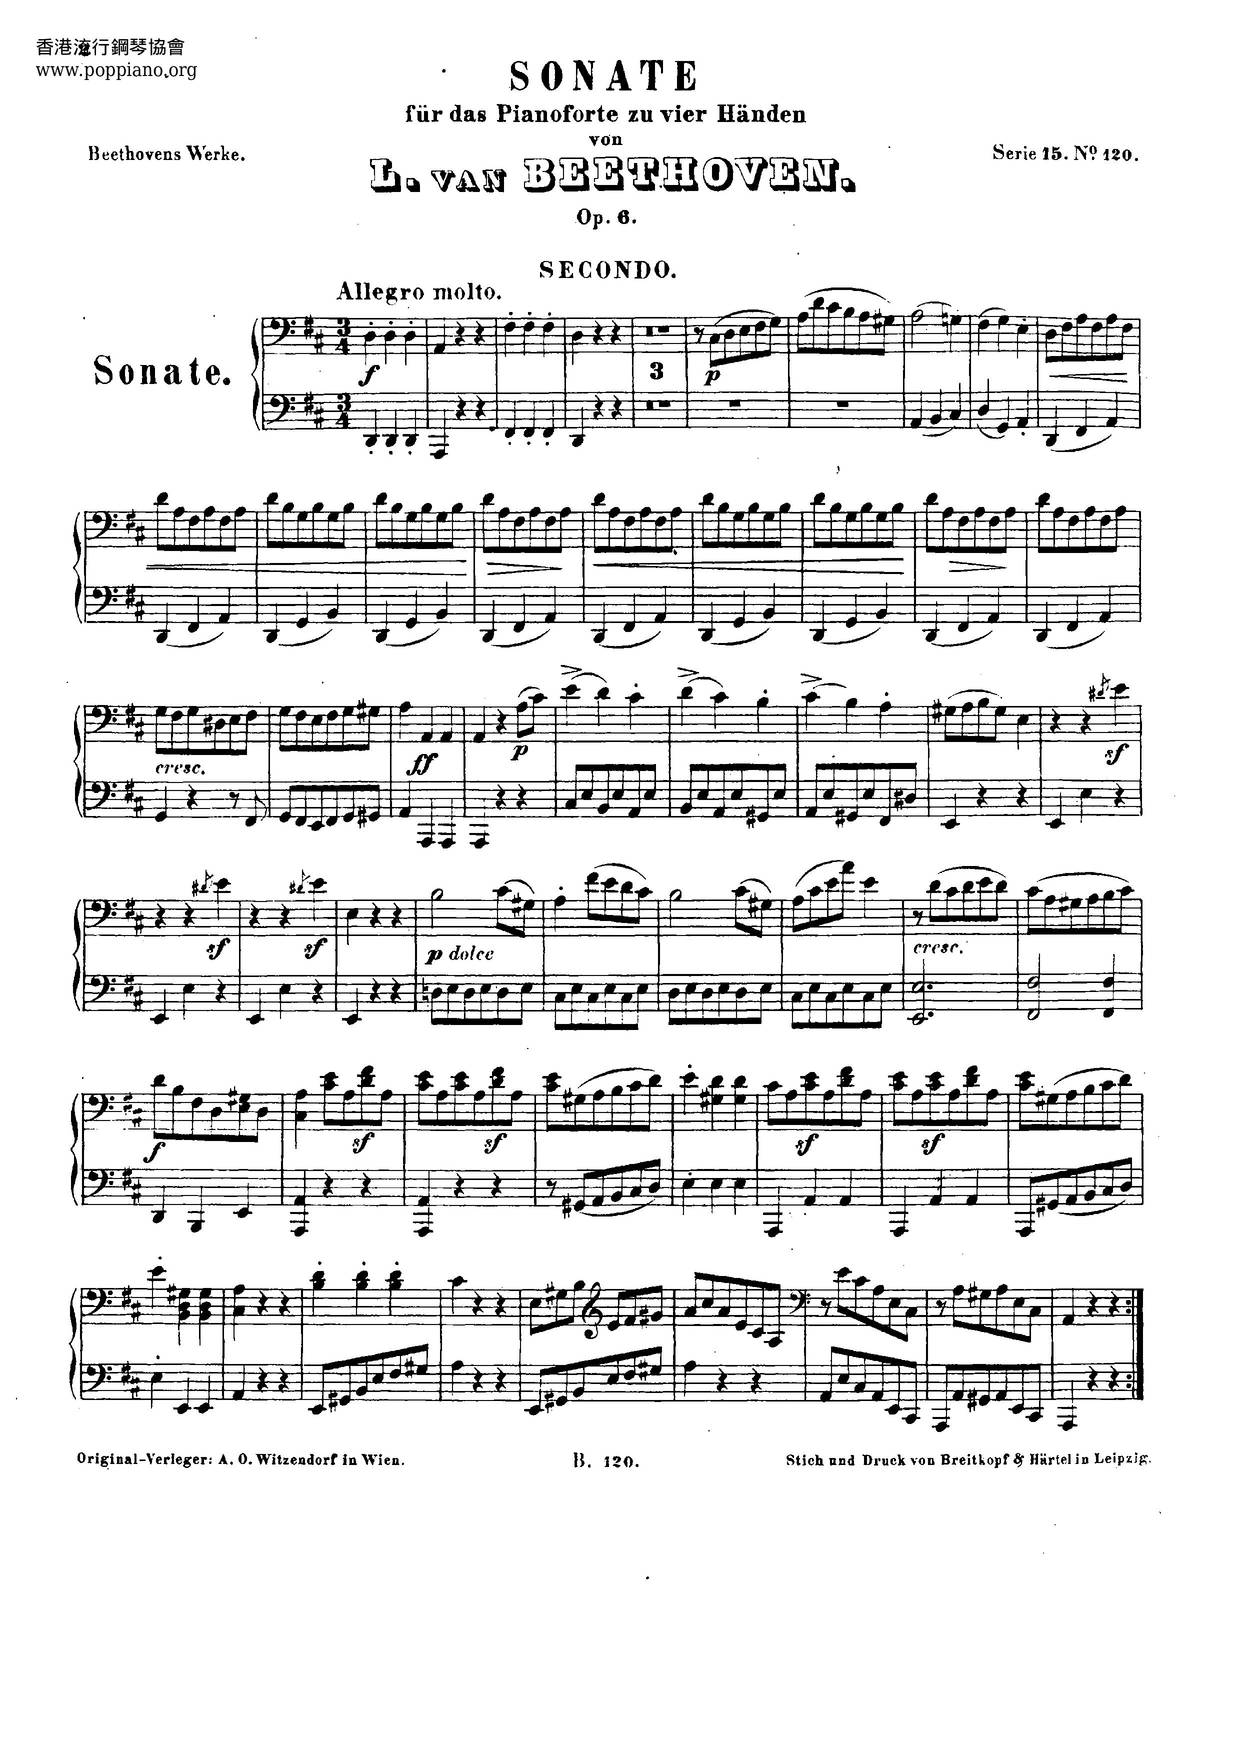 Sonata For Piano Four Hands In D Major, Op. 6琴谱